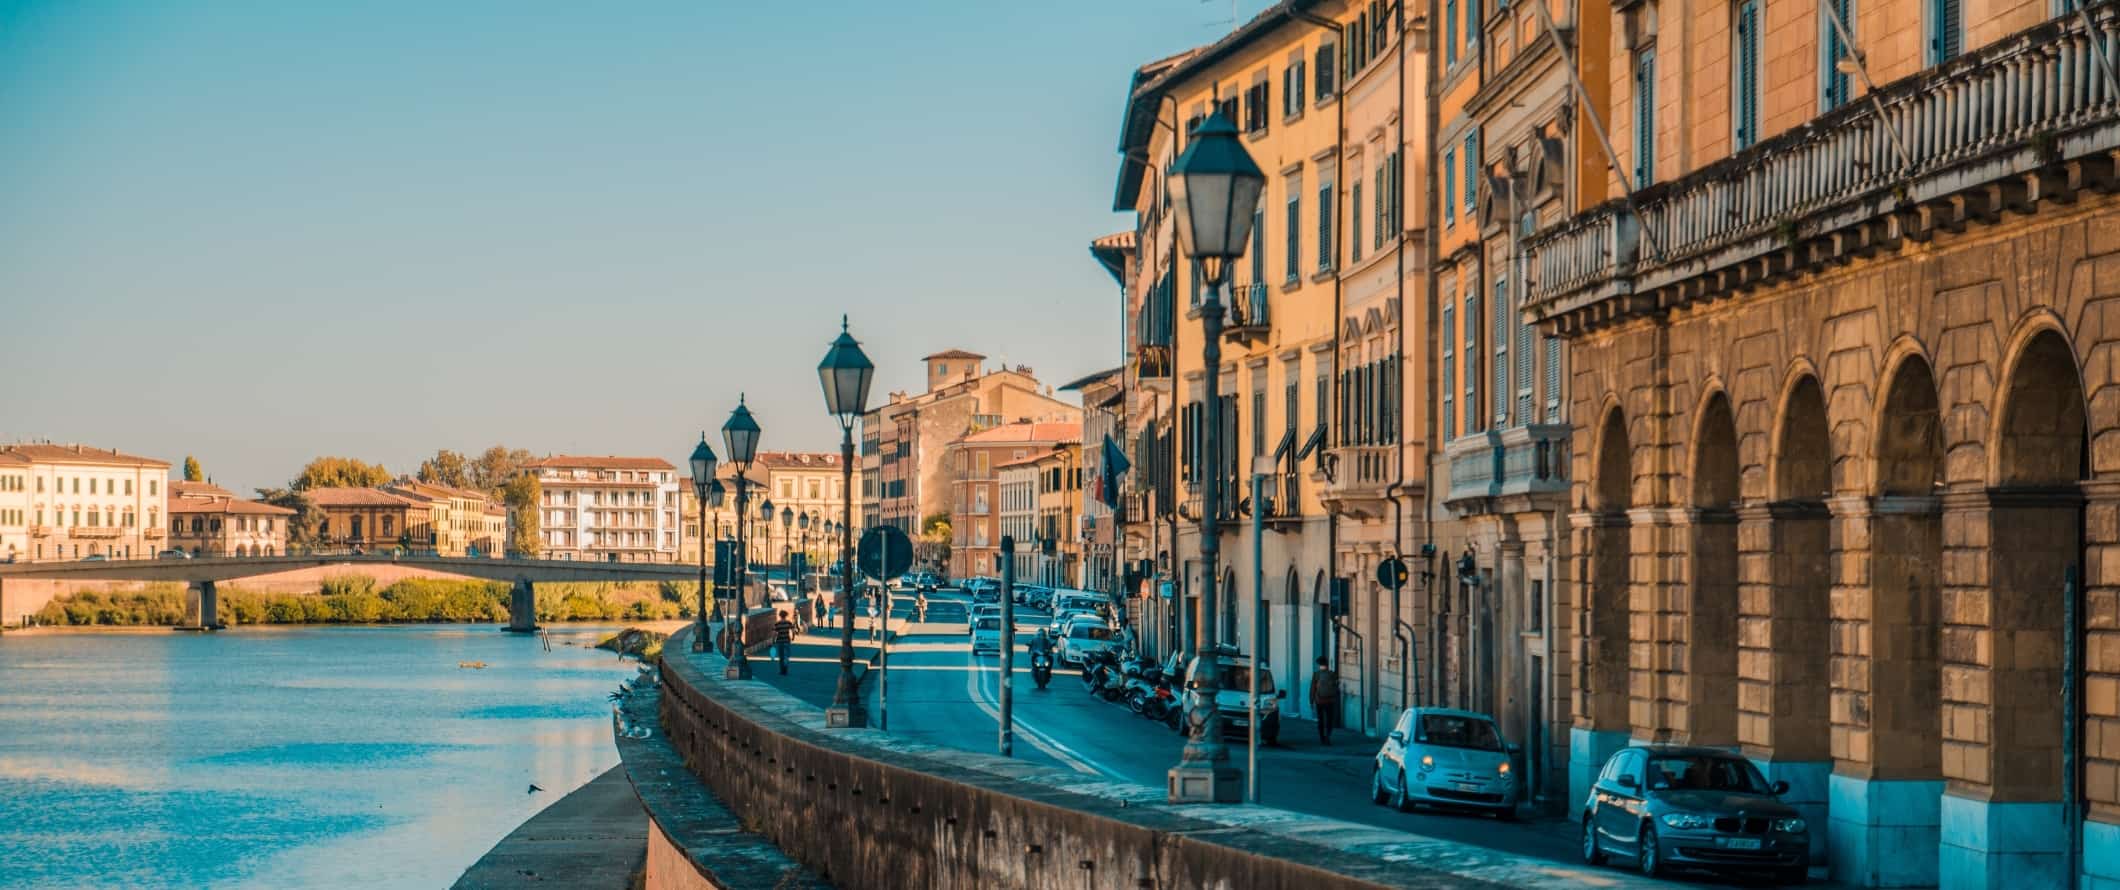 Buildings and winding road along the riverfront of Pisa, Italy.